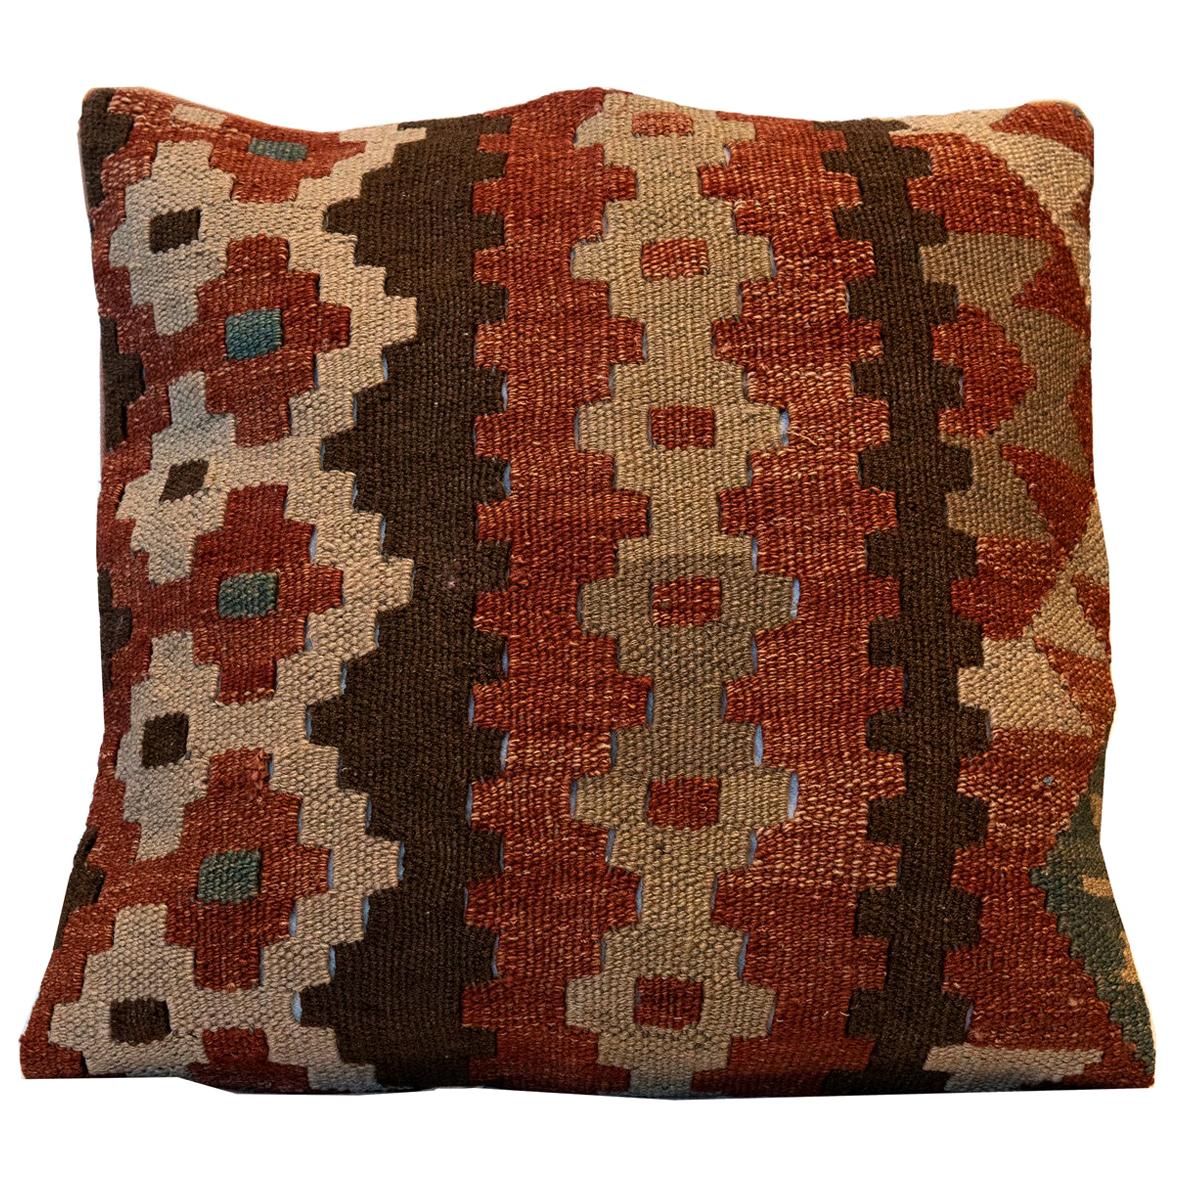 Hand Woven Kilim Decorative Pillow, Bench Cushion Cover Hand Knotted